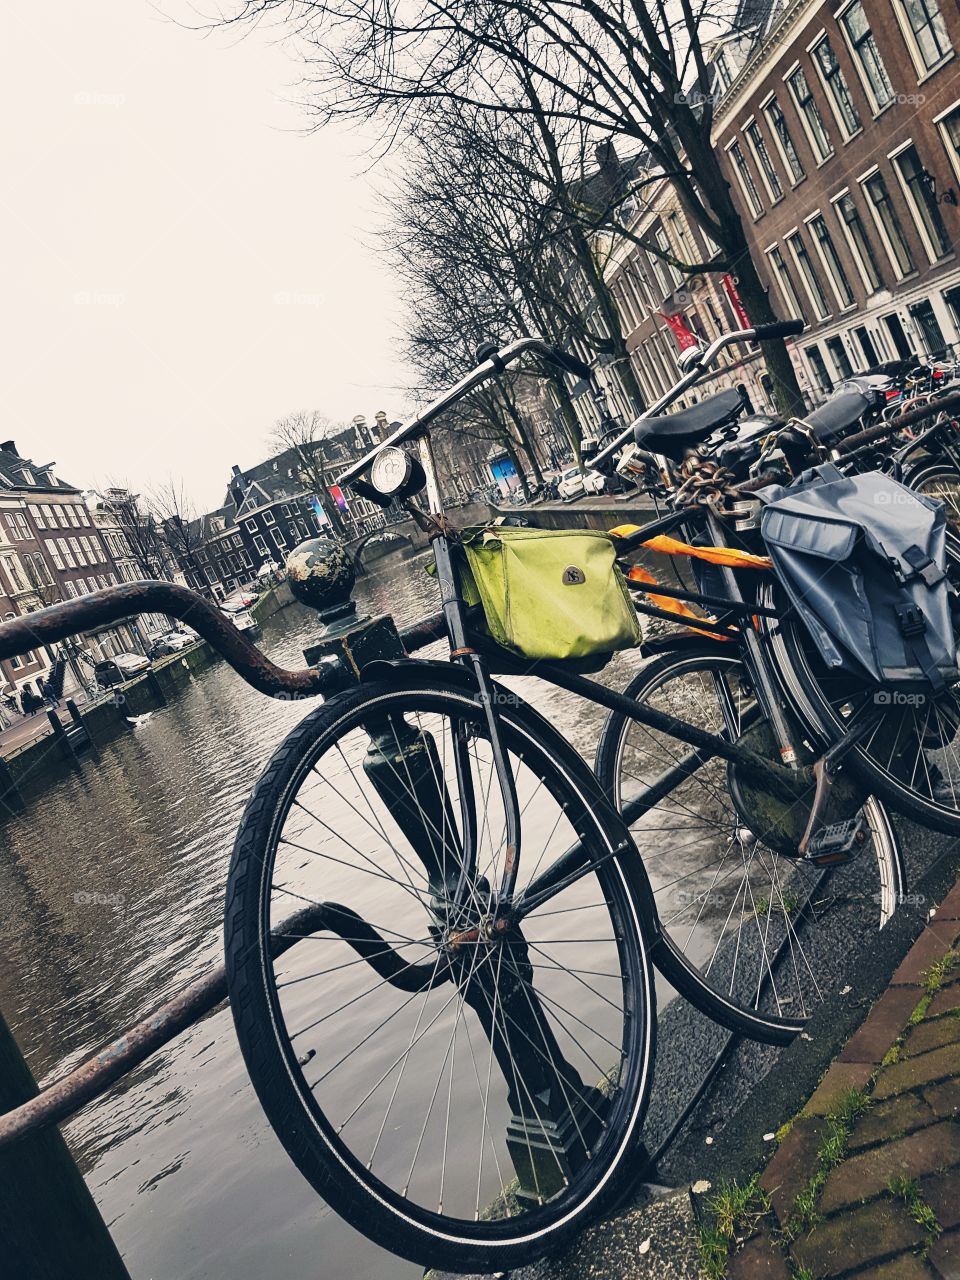 A characteristic scenery of Amsterdam